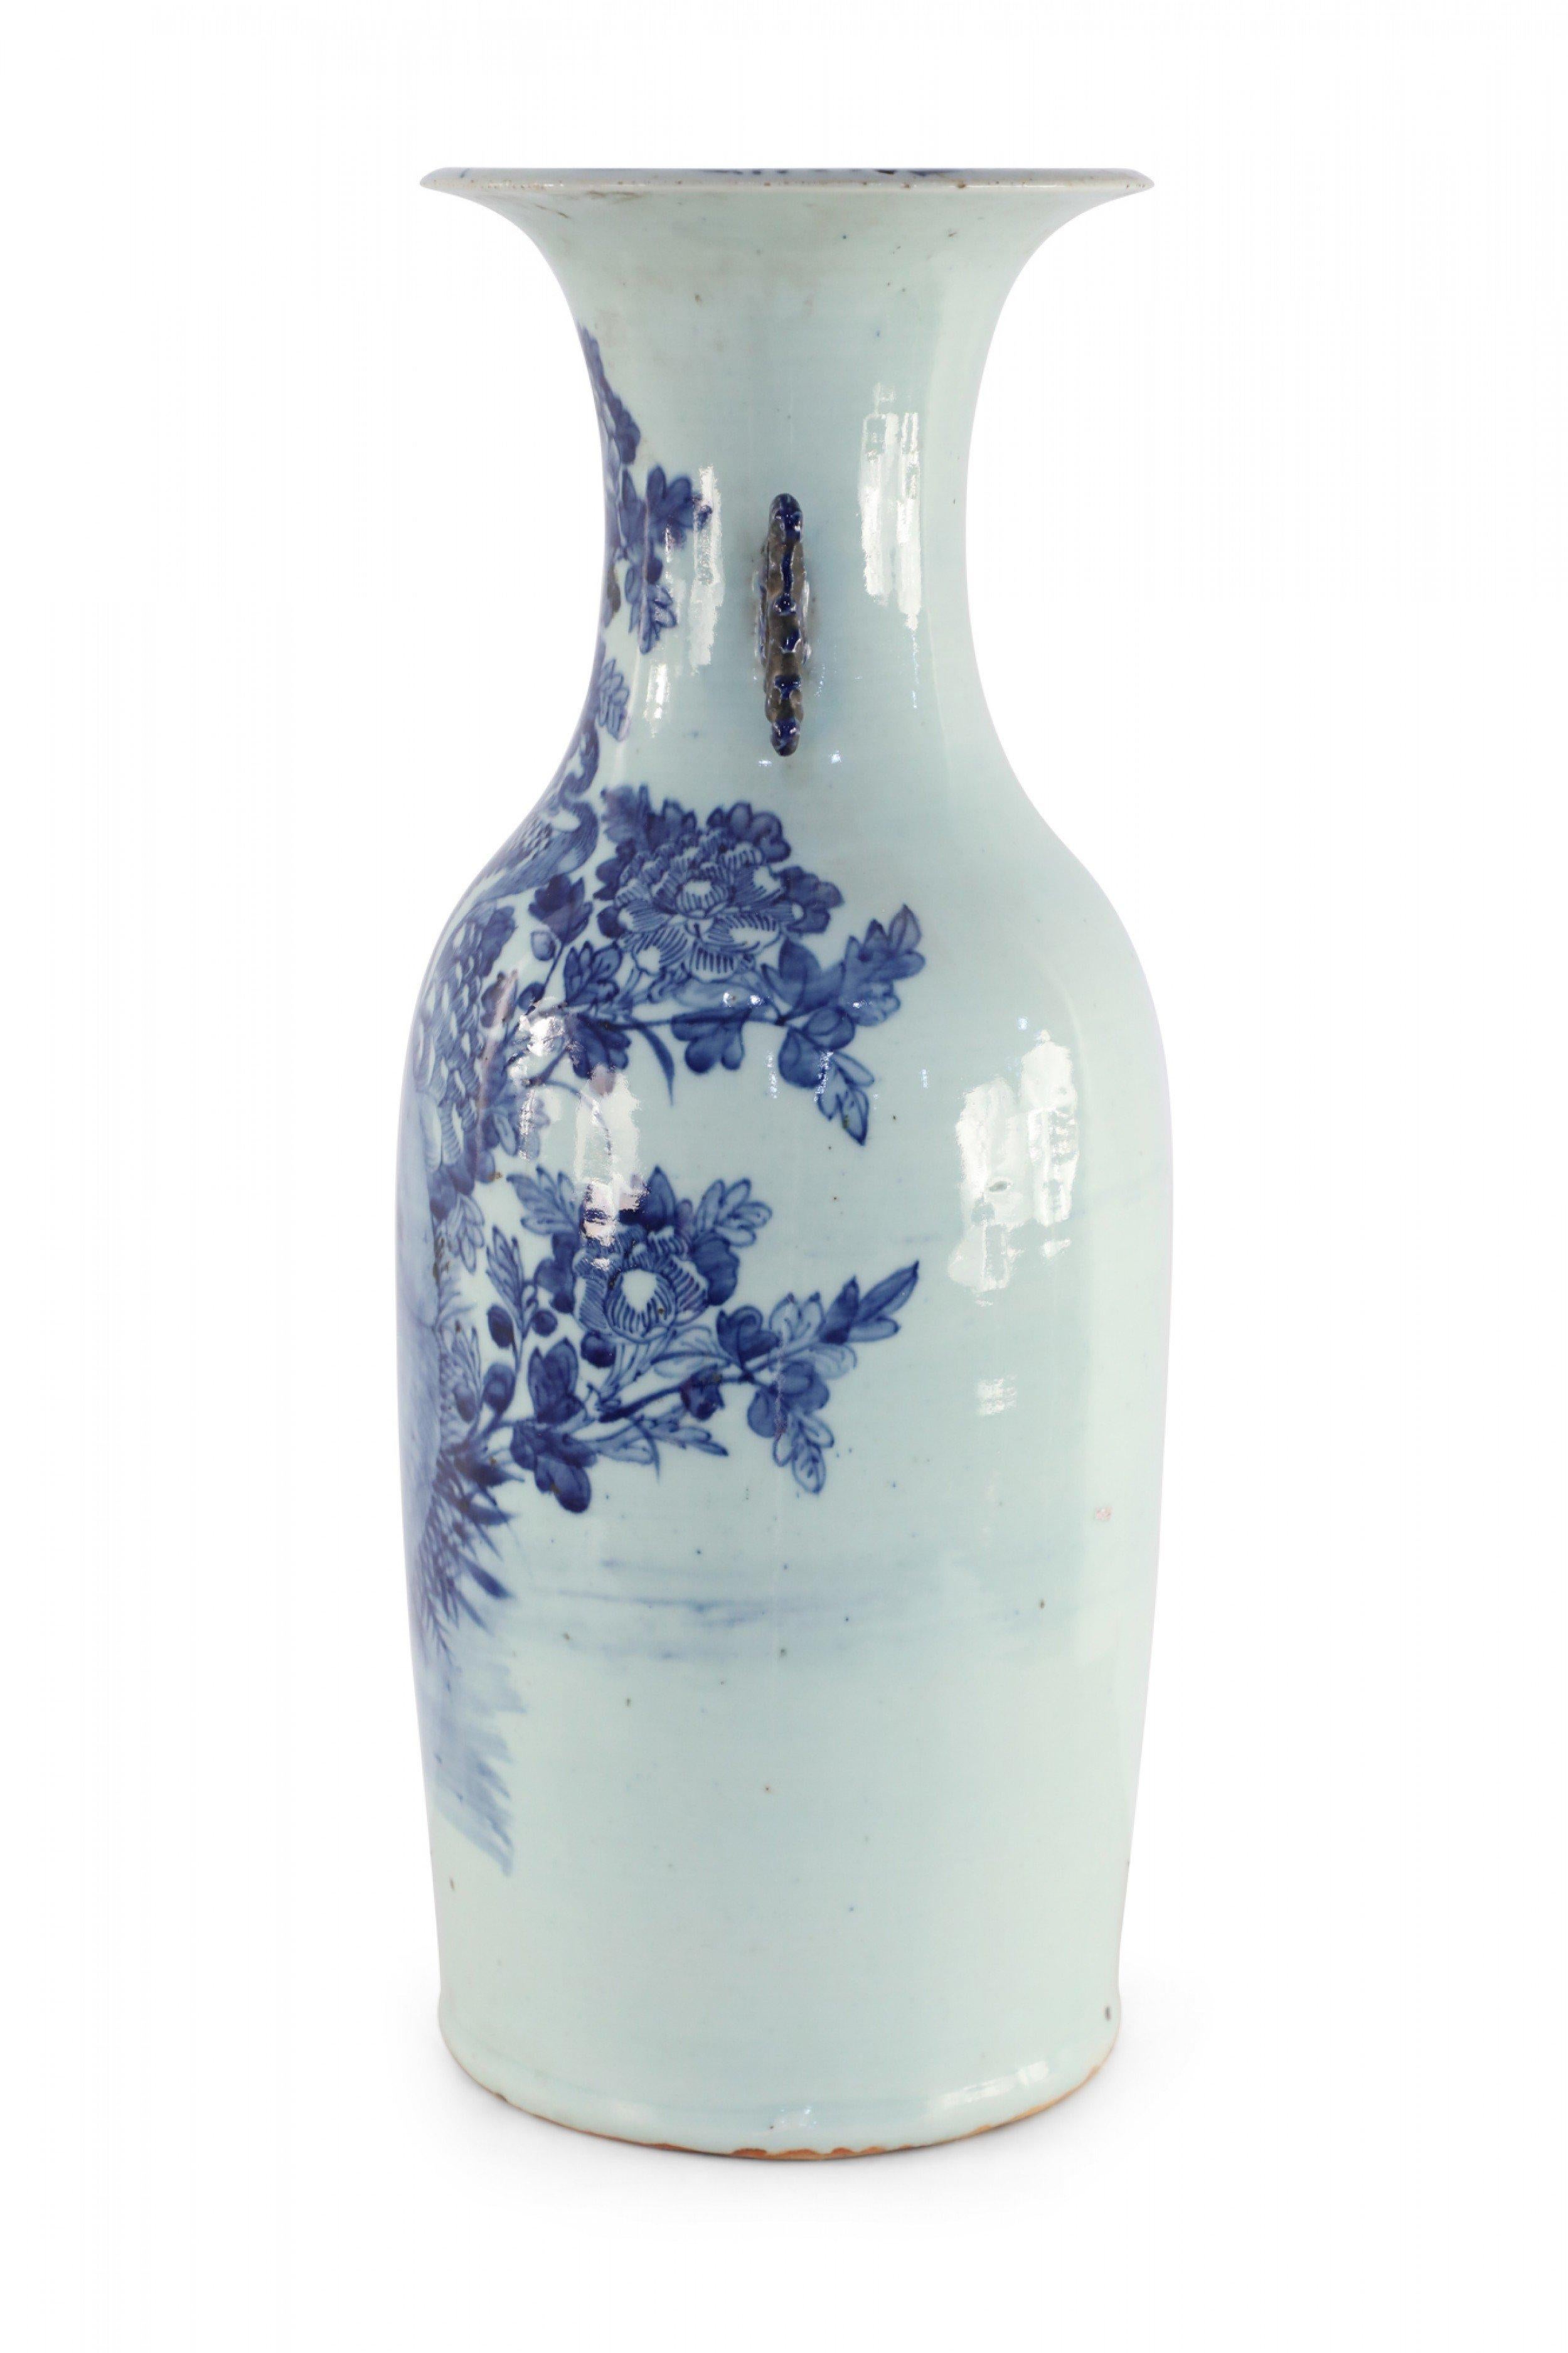 Antique Chinese (late 19th century) large off-white, porcelain urn with a blue peacock amid florals and two blue scrolled handles along the neck.
     